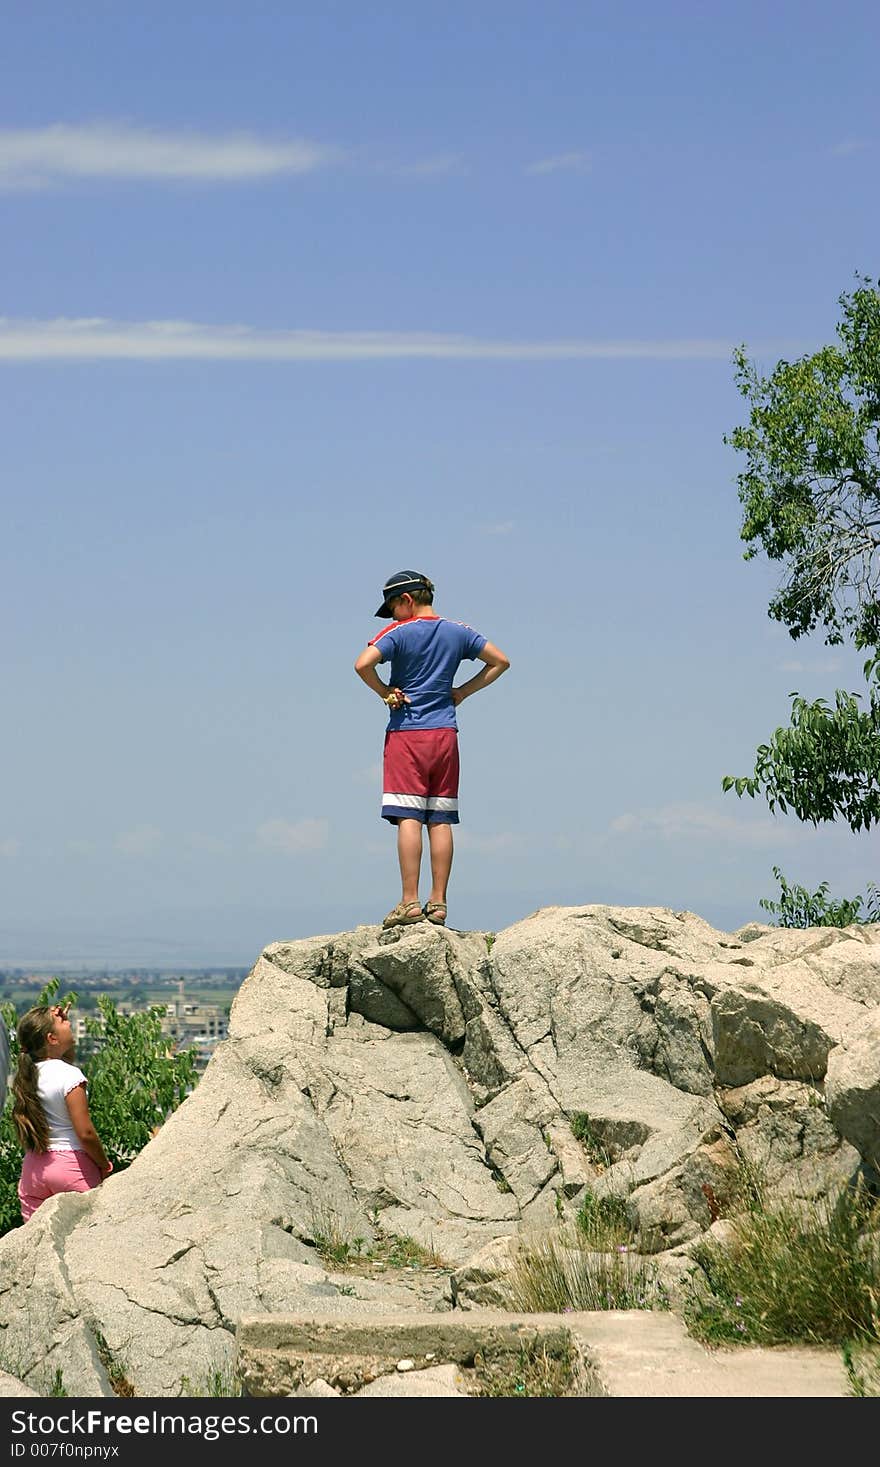 The teenager stands on a mountain, girl below